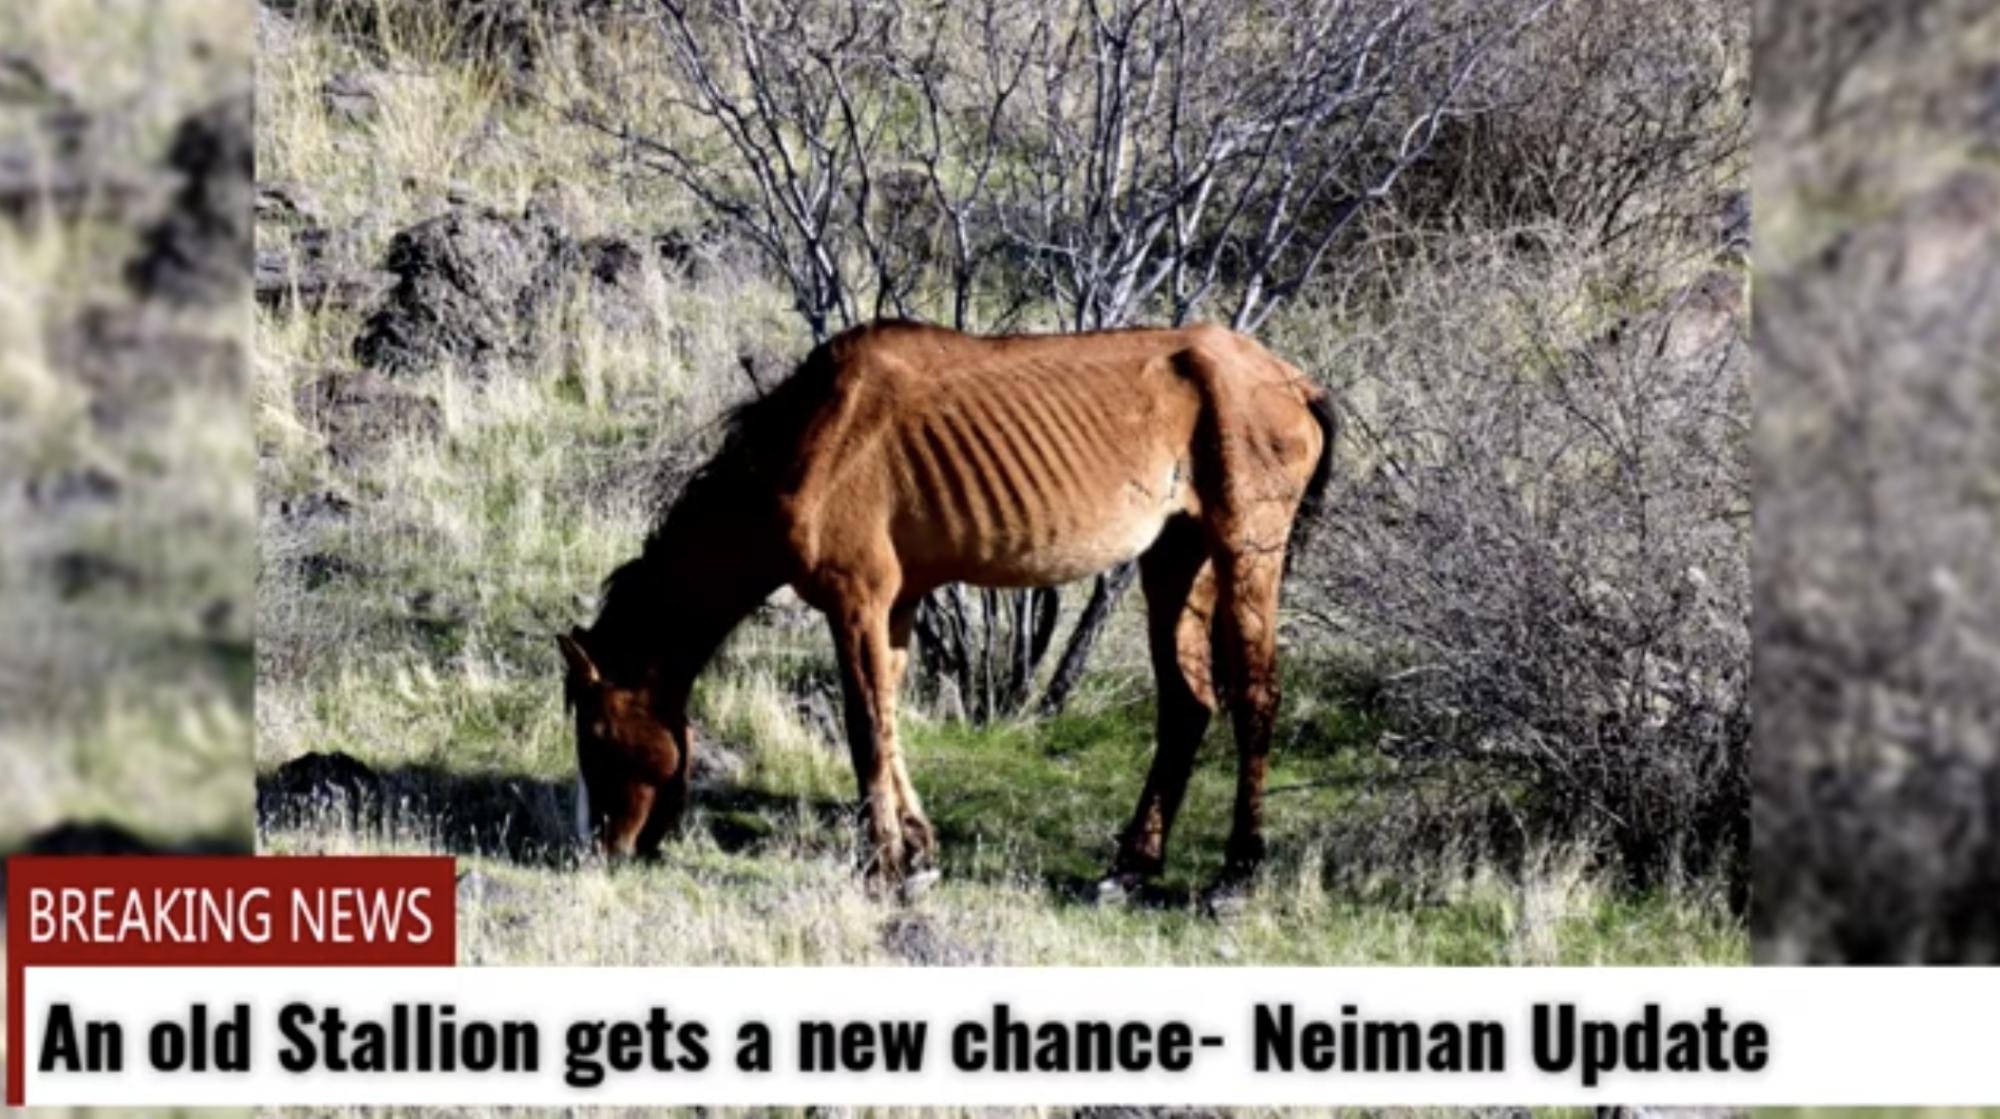 Neiman was a beautiful and compassionate lead stallion